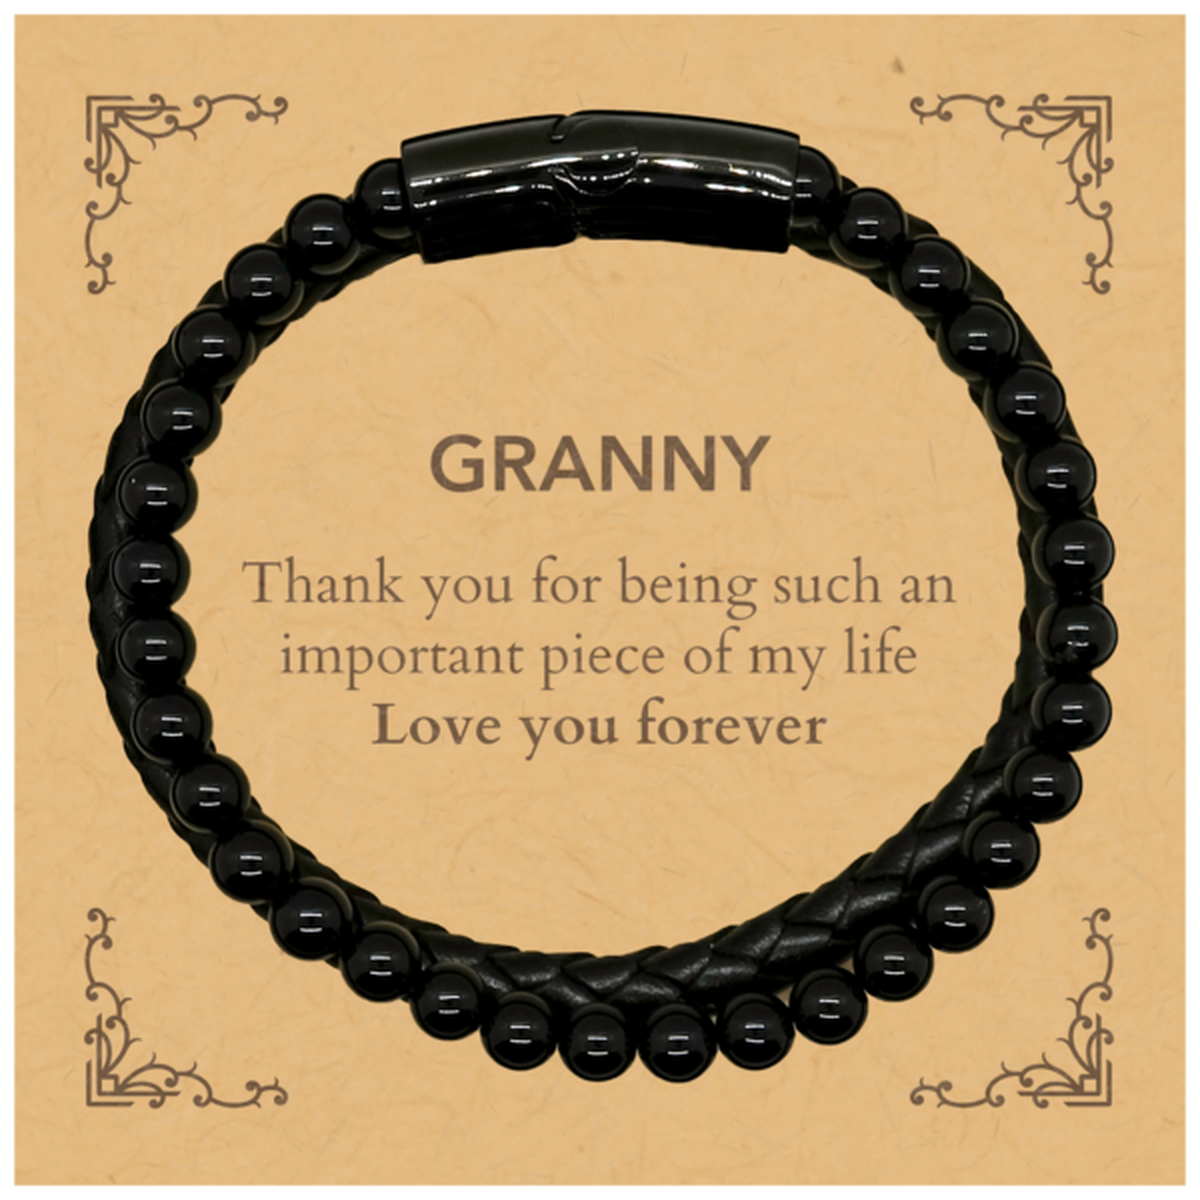 Appropriate Granny Stone Leather Bracelets Epic Birthday Gifts for Granny Thank you for being such an important piece of my life Granny Christmas Mothers Fathers Day